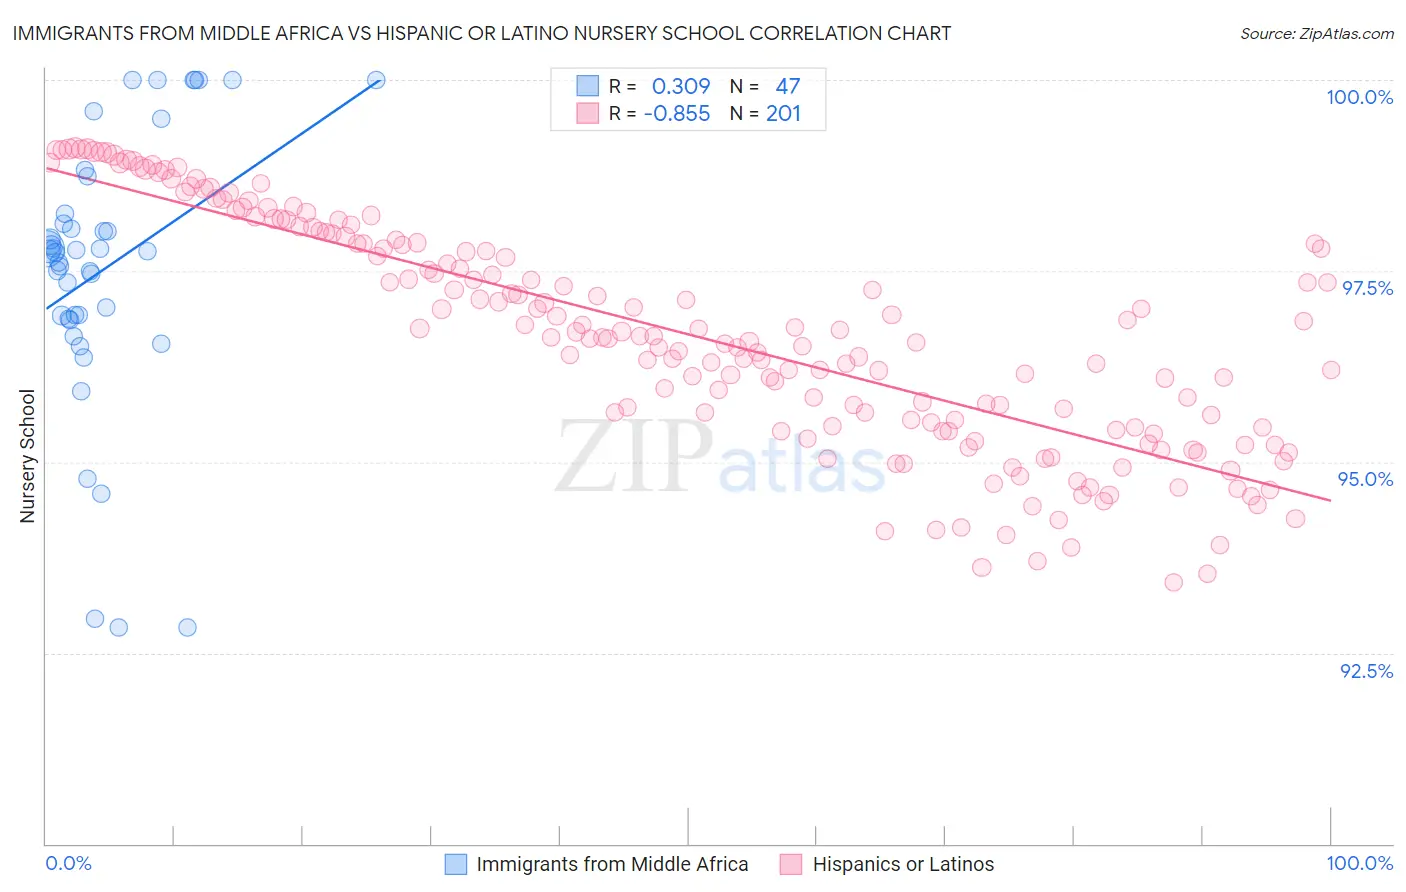 Immigrants from Middle Africa vs Hispanic or Latino Nursery School